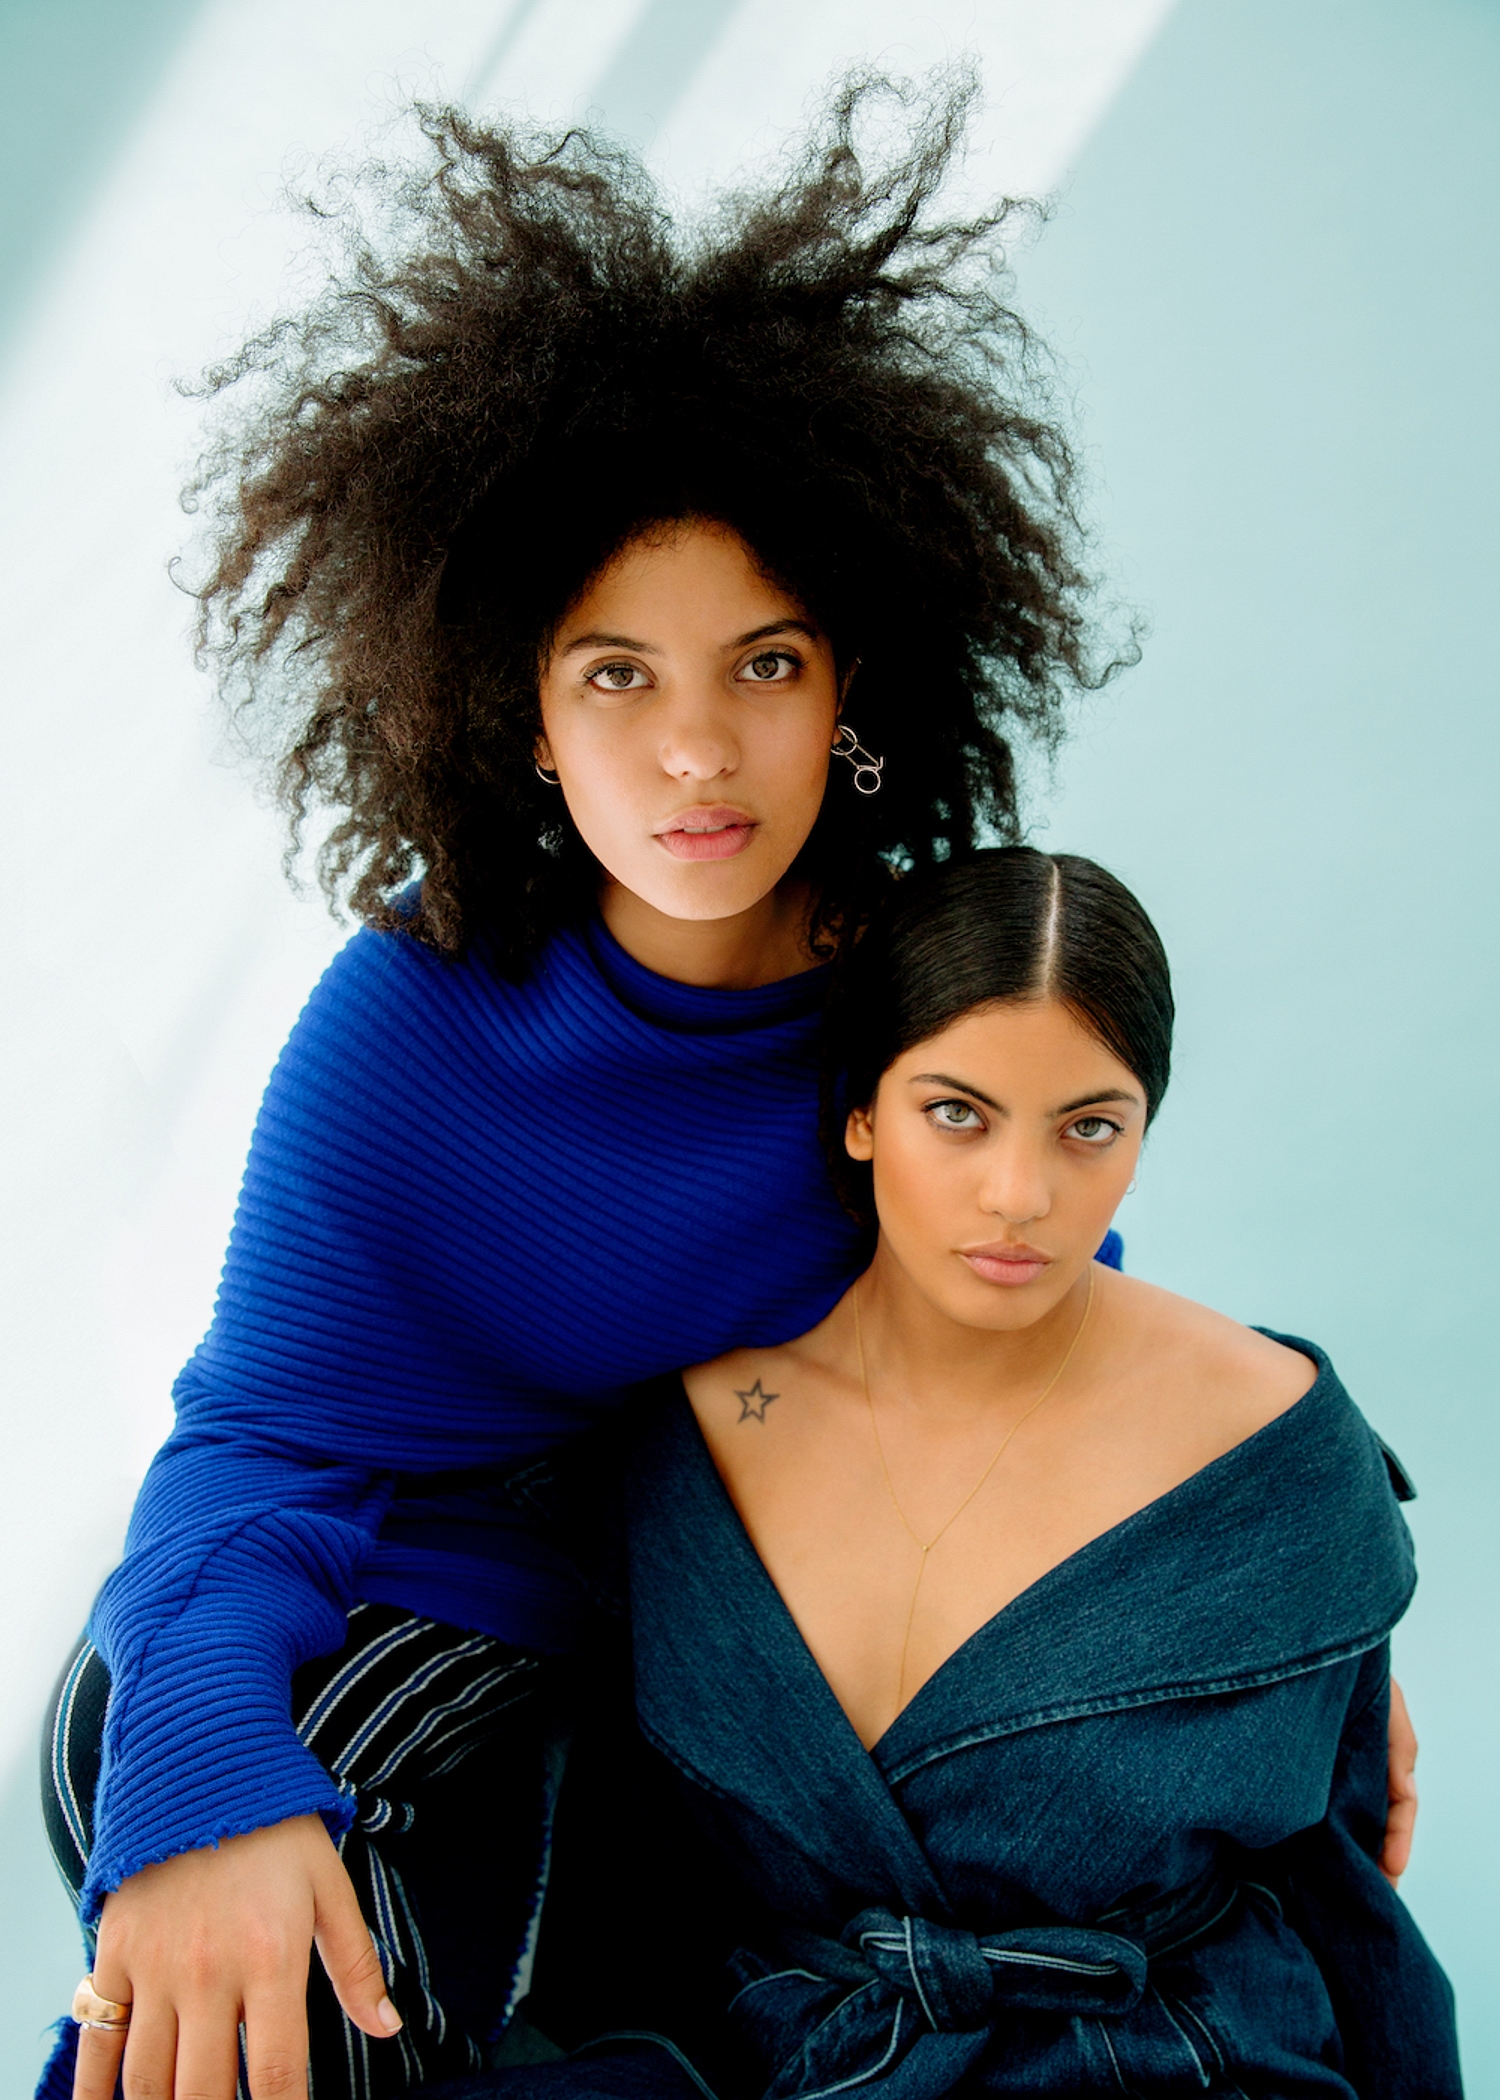 Embers from the Ashes: Ibeyi